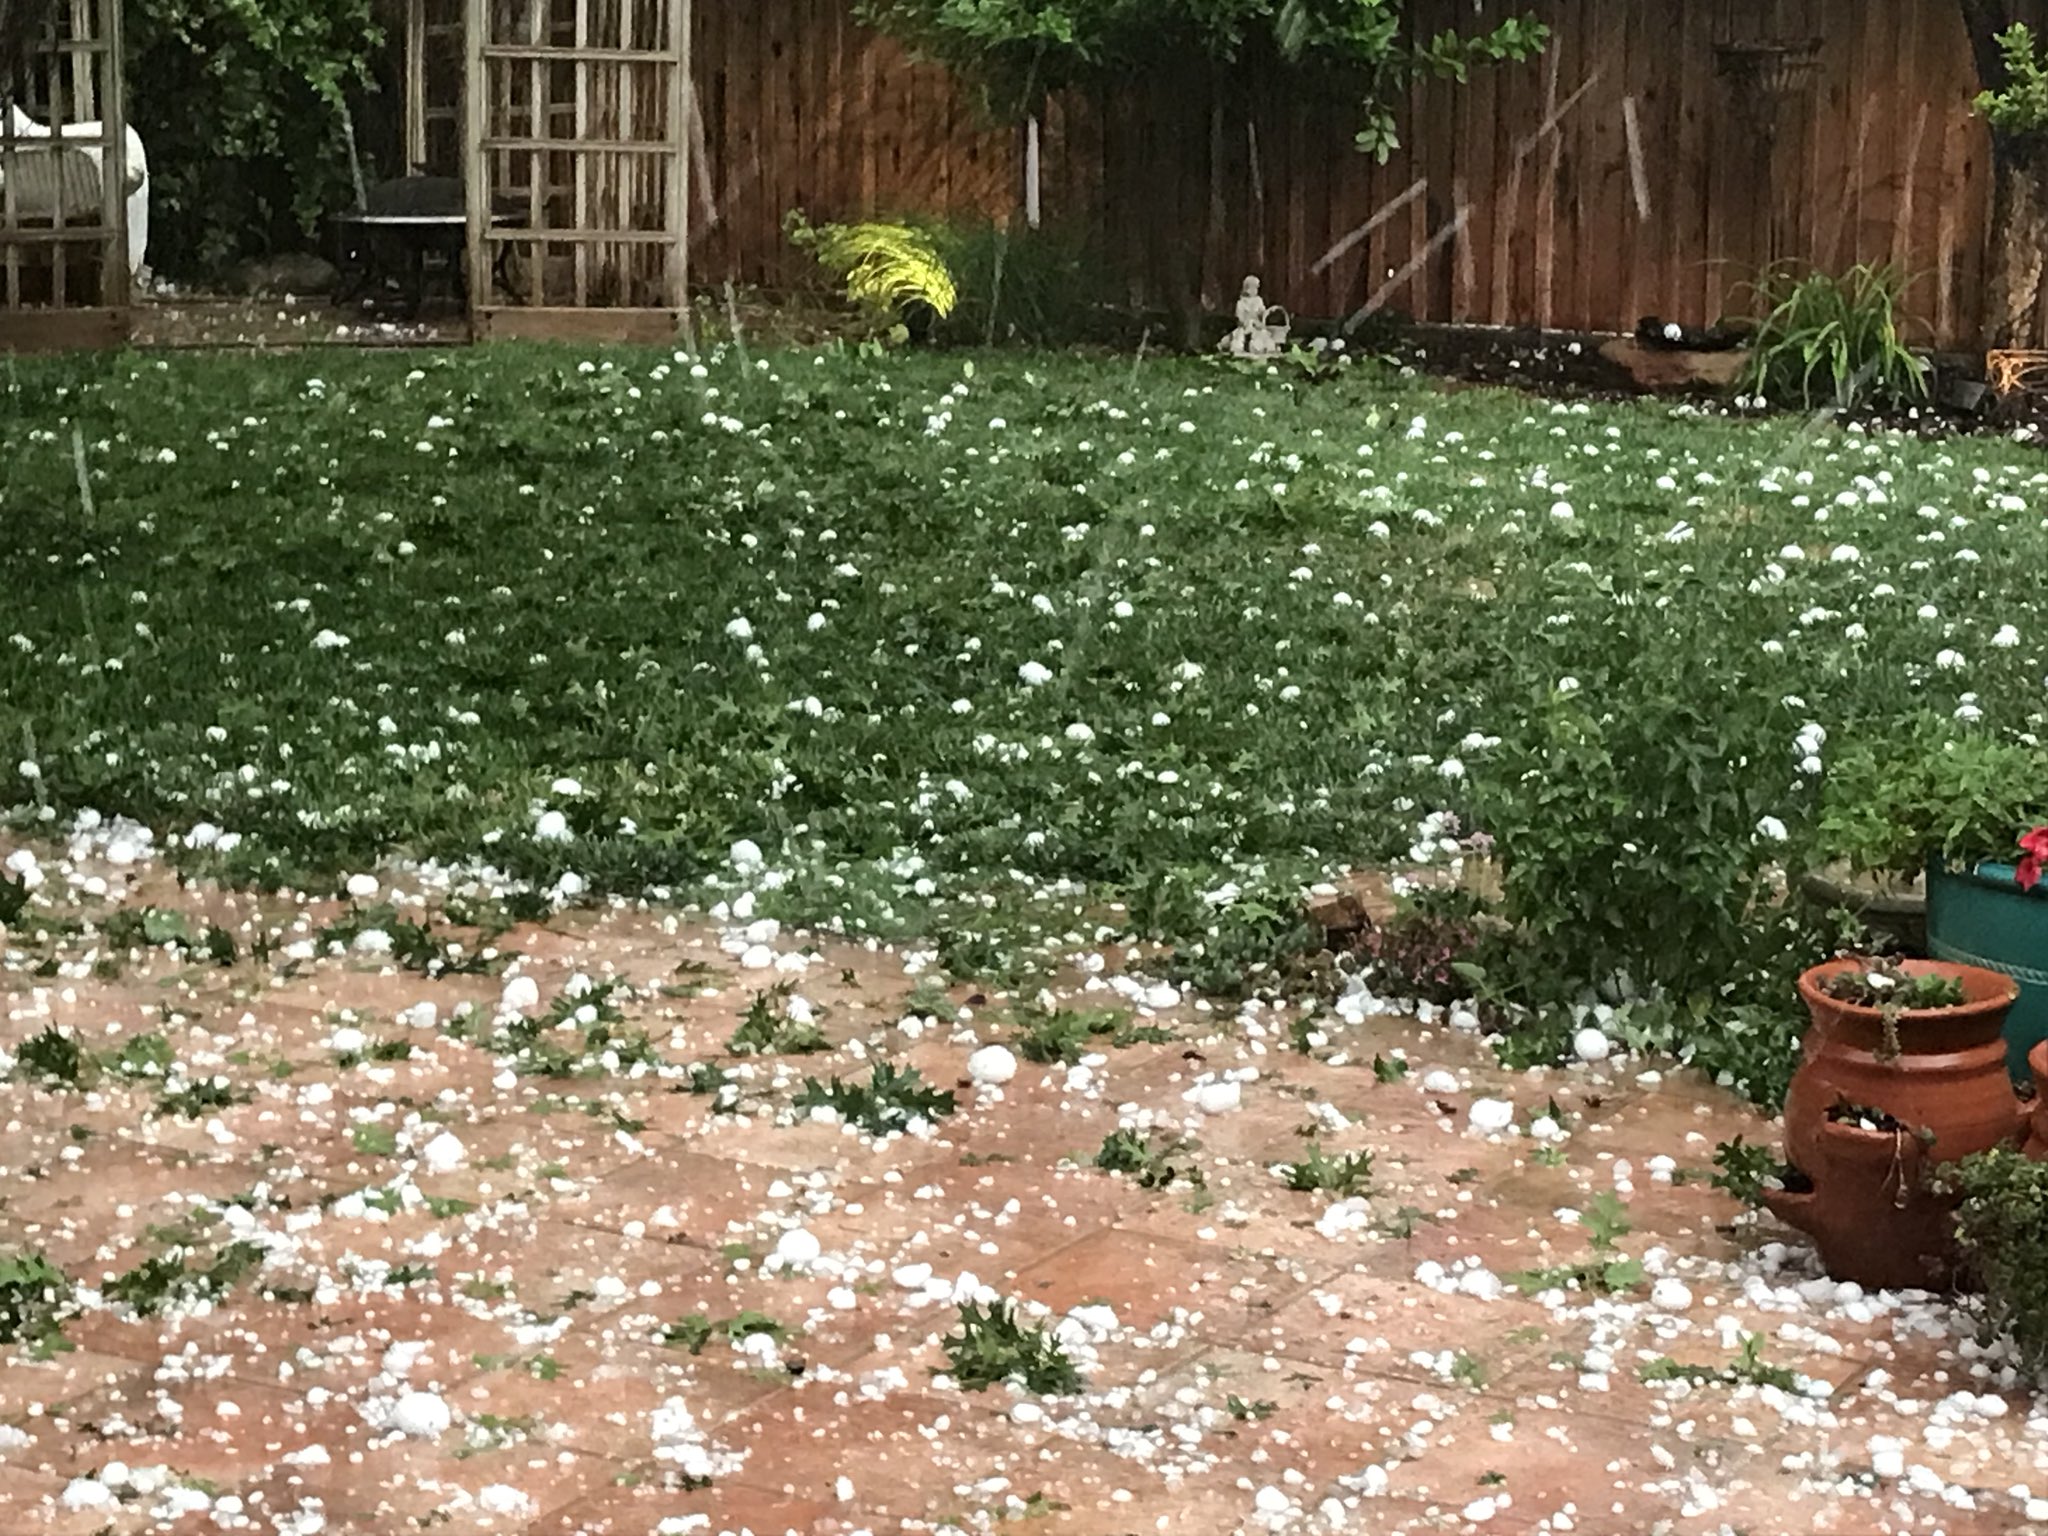 Image of hail in southwest Lubbock captured on 19 May 2018. The picture is courtesy of John Holsenbeck.